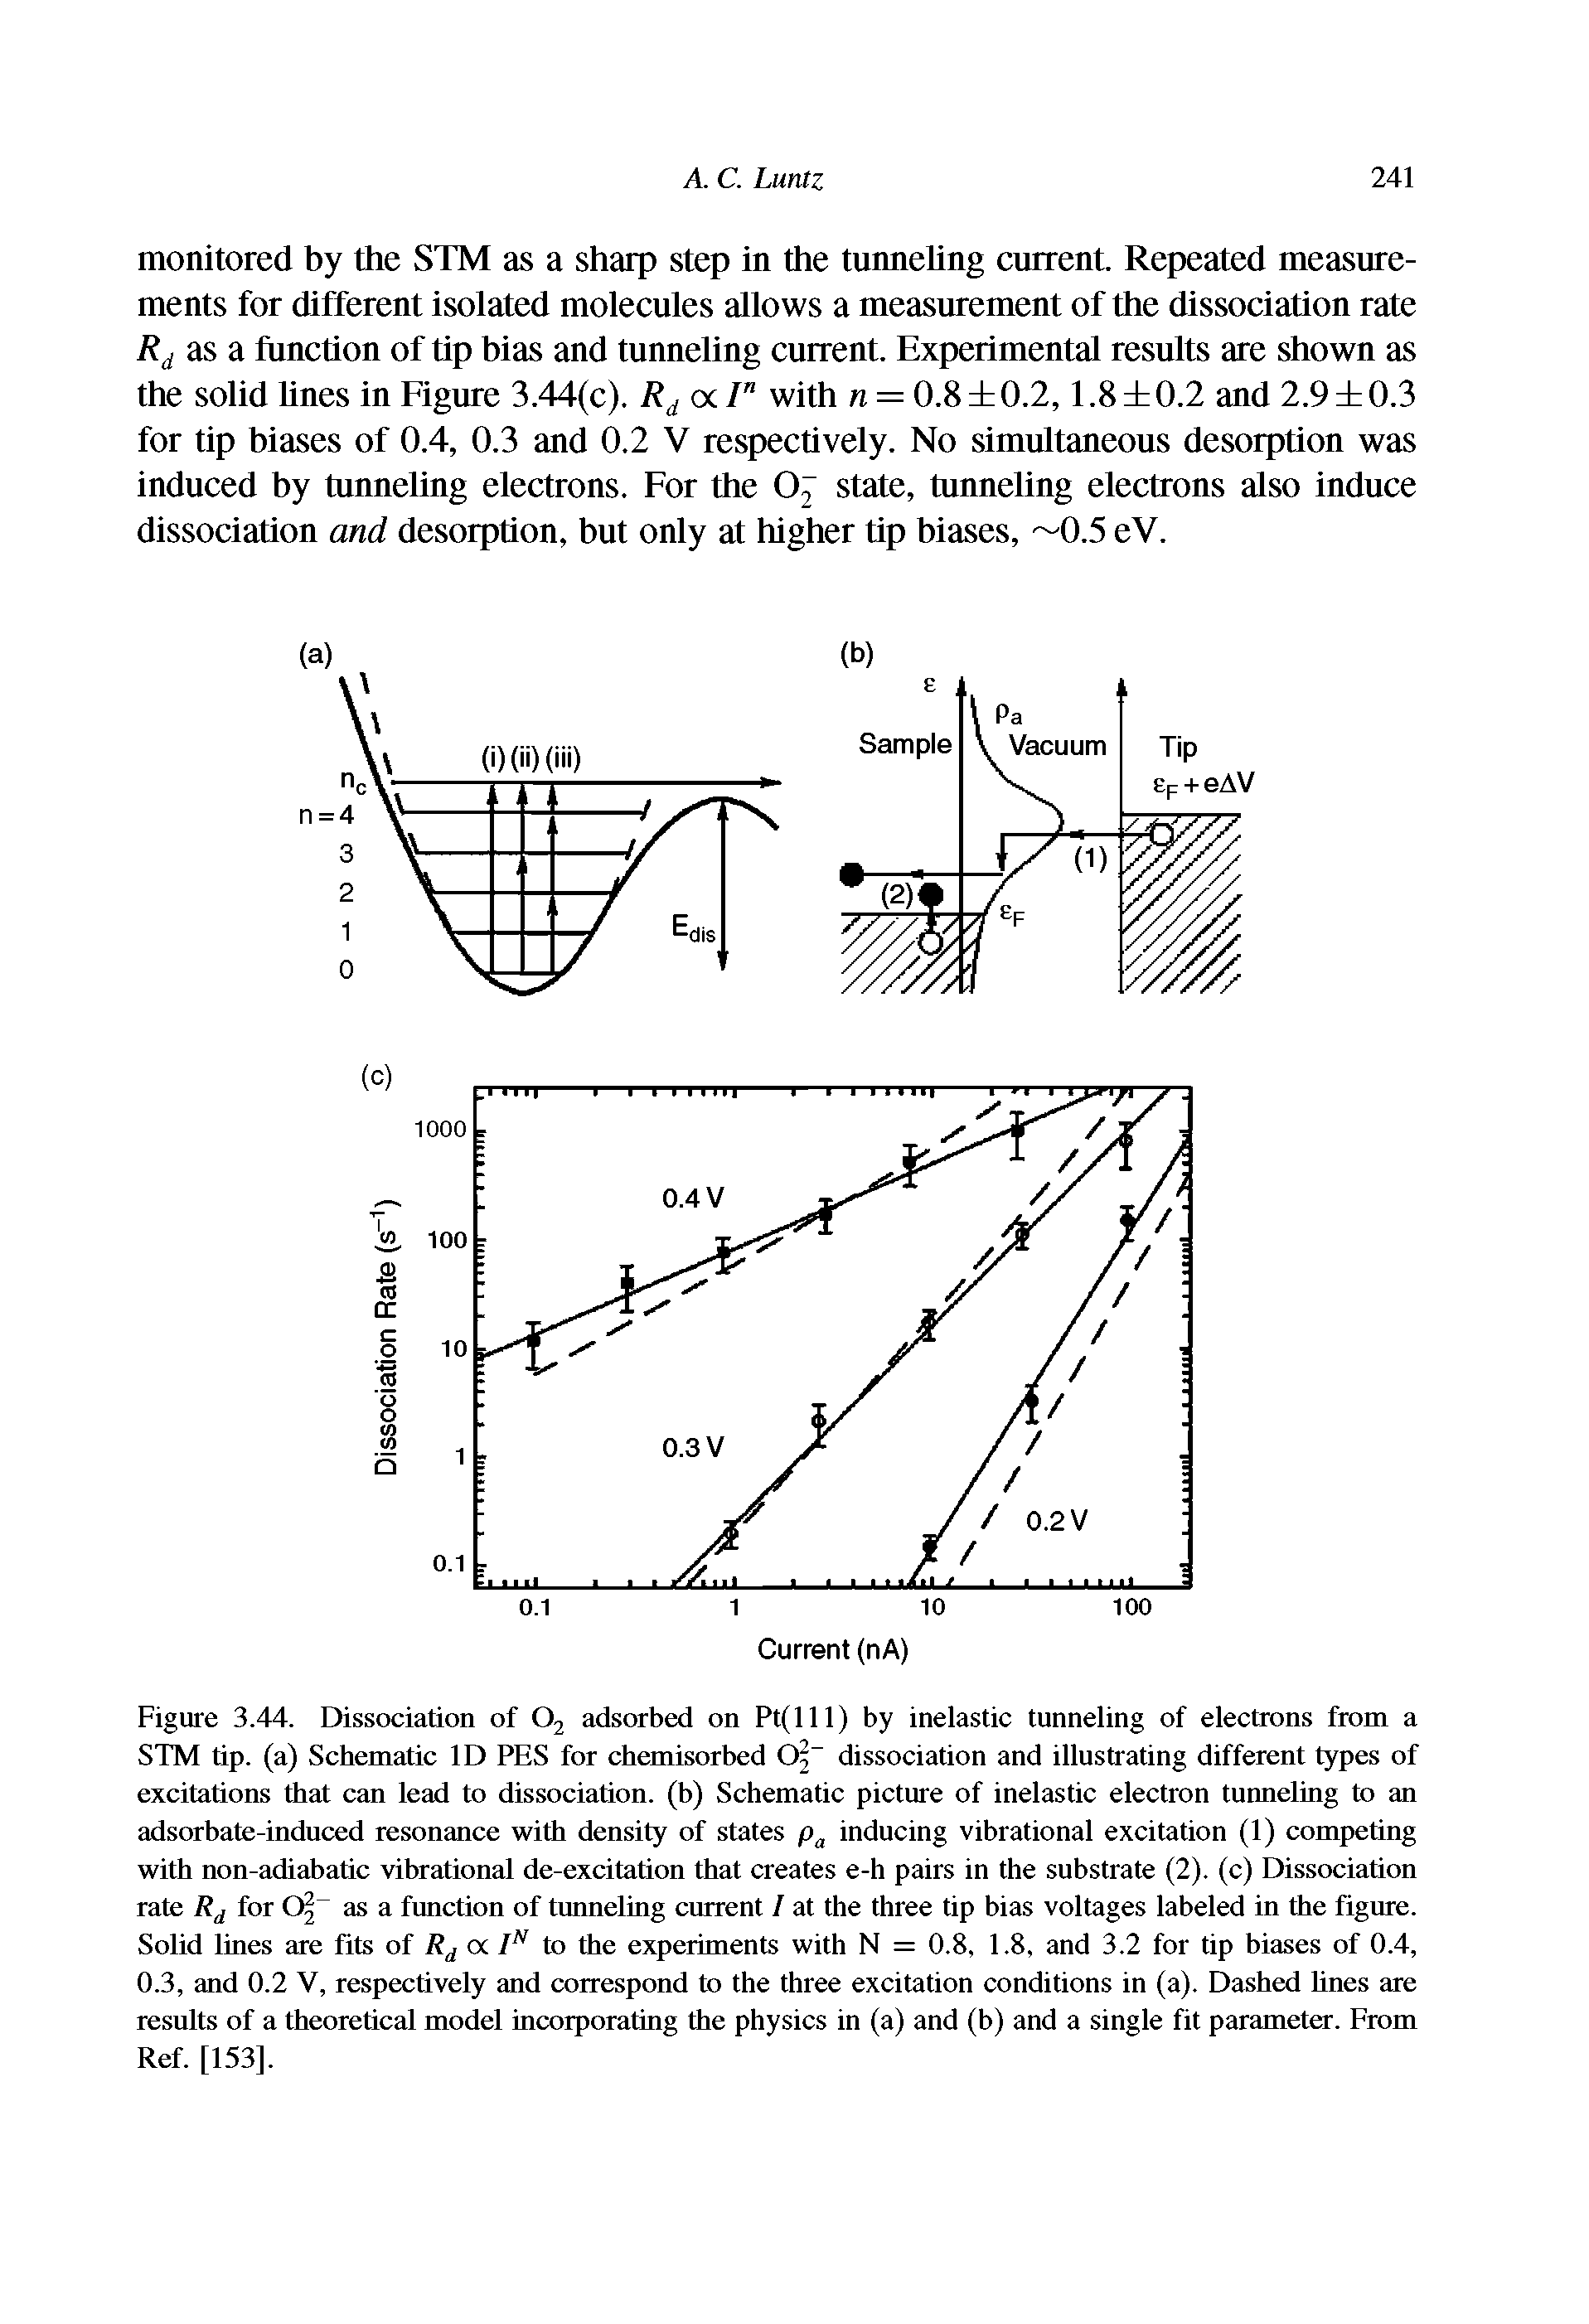 Figure 3.44. Dissociation of 02 adsorbed on Pt(lll) by inelastic tunneling of electrons from a STM tip. (a) Schematic ID PES for chemisorbed Of dissociation and illustrating different types of excitations that can lead to dissociation, (b) Schematic picture of inelastic electron tunneling to an adsorbate-induced resonance with density of states pa inducing vibrational excitation (1) competing with non-adiabatic vibrational de-excitation that creates e-h pairs in the substrate (2). (c) Dissociation rate Rd for 0 as a function of tunneling current I at the three tip bias voltages labeled in the figure. Solid lines are fits of Rd a IN to the experiments with N = 0.8, 1.8, and 3.2 for tip biases of 0.4, 0.3, and 0.2 V, respectively and correspond to the three excitation conditions in (a). Dashed lines are results of a theoretical model incorporating the physics in (a) and (b) and a single fit parameter. From Ref. [153].